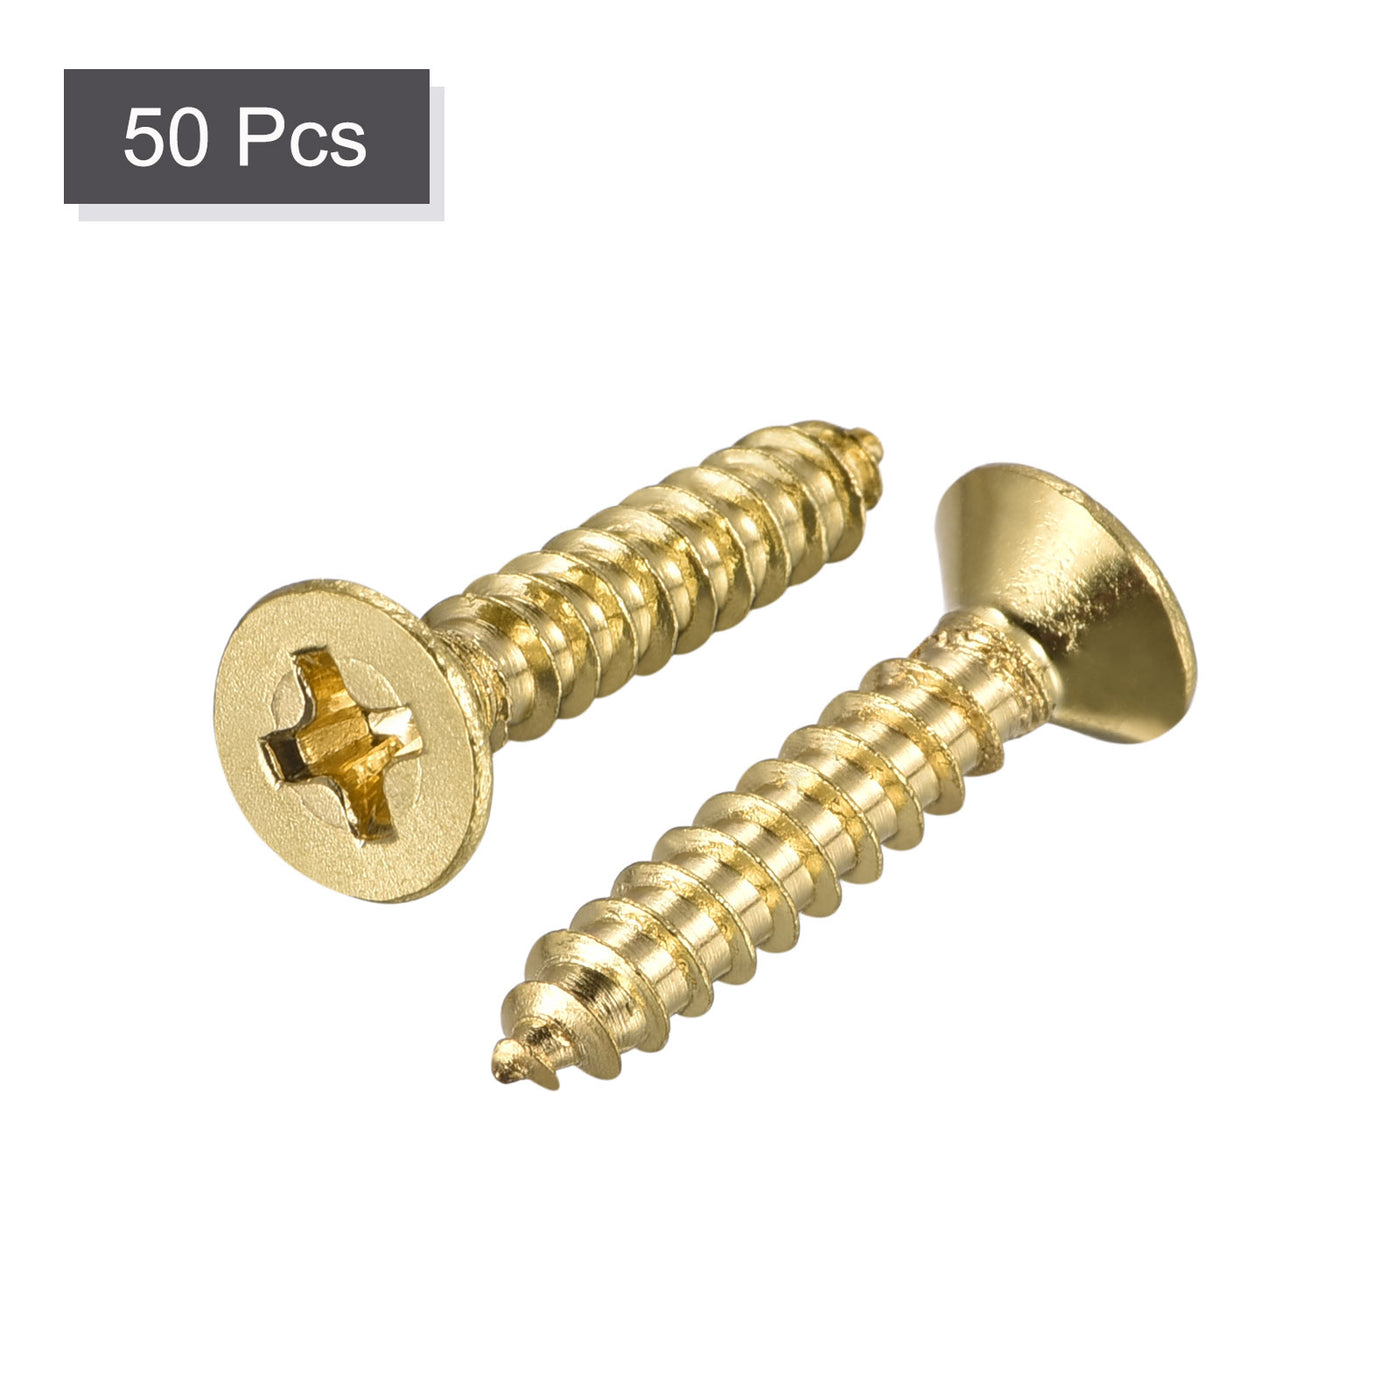 Uxcell Uxcell Brass Wood Screws, M4x20mm Phillips Flat Head Self Tapping Connector for Door, Cabinet, Wooden Furniture 25Pcs